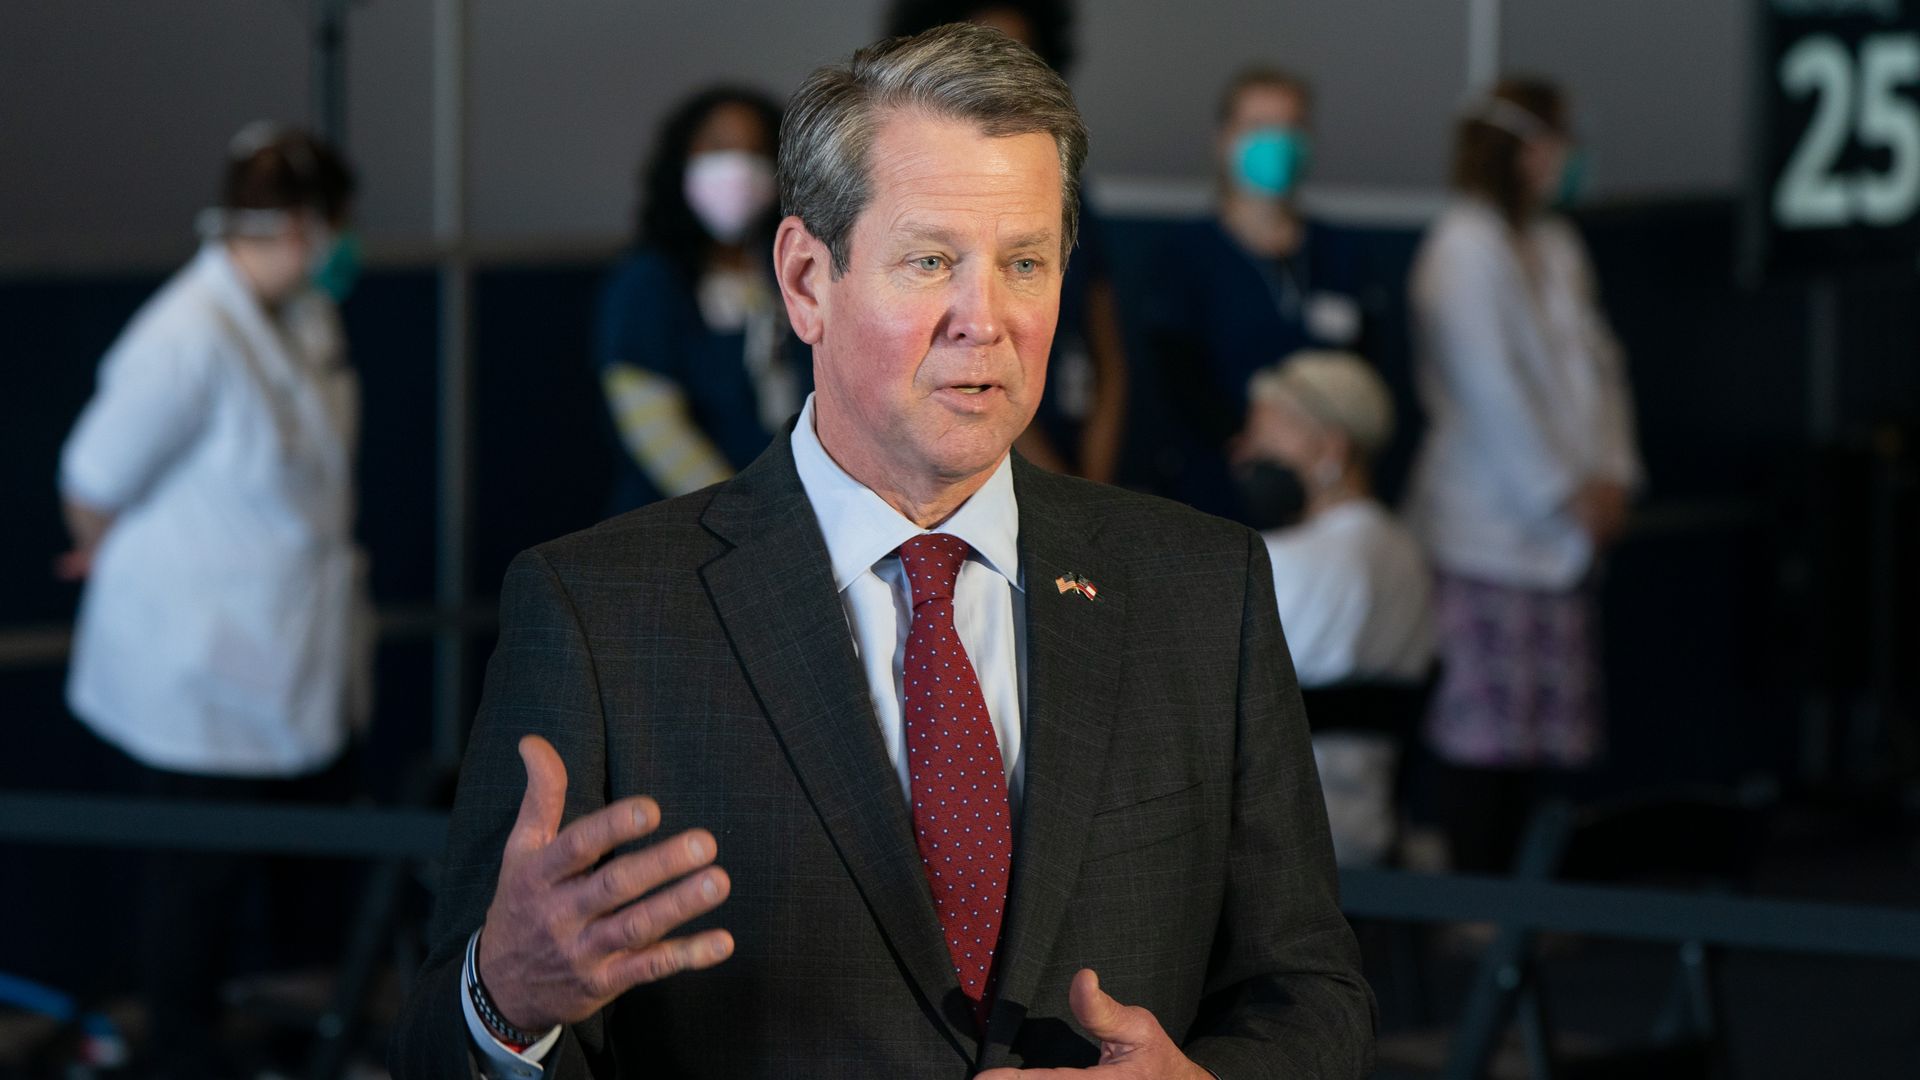 Brian Kemp, governor of Georgia, speaks during a news conference at a mass covid-19 vaccination site at the Delta Flight Museum in Hapeville, Georgia, U.S., on Wednesday, Feb. 25